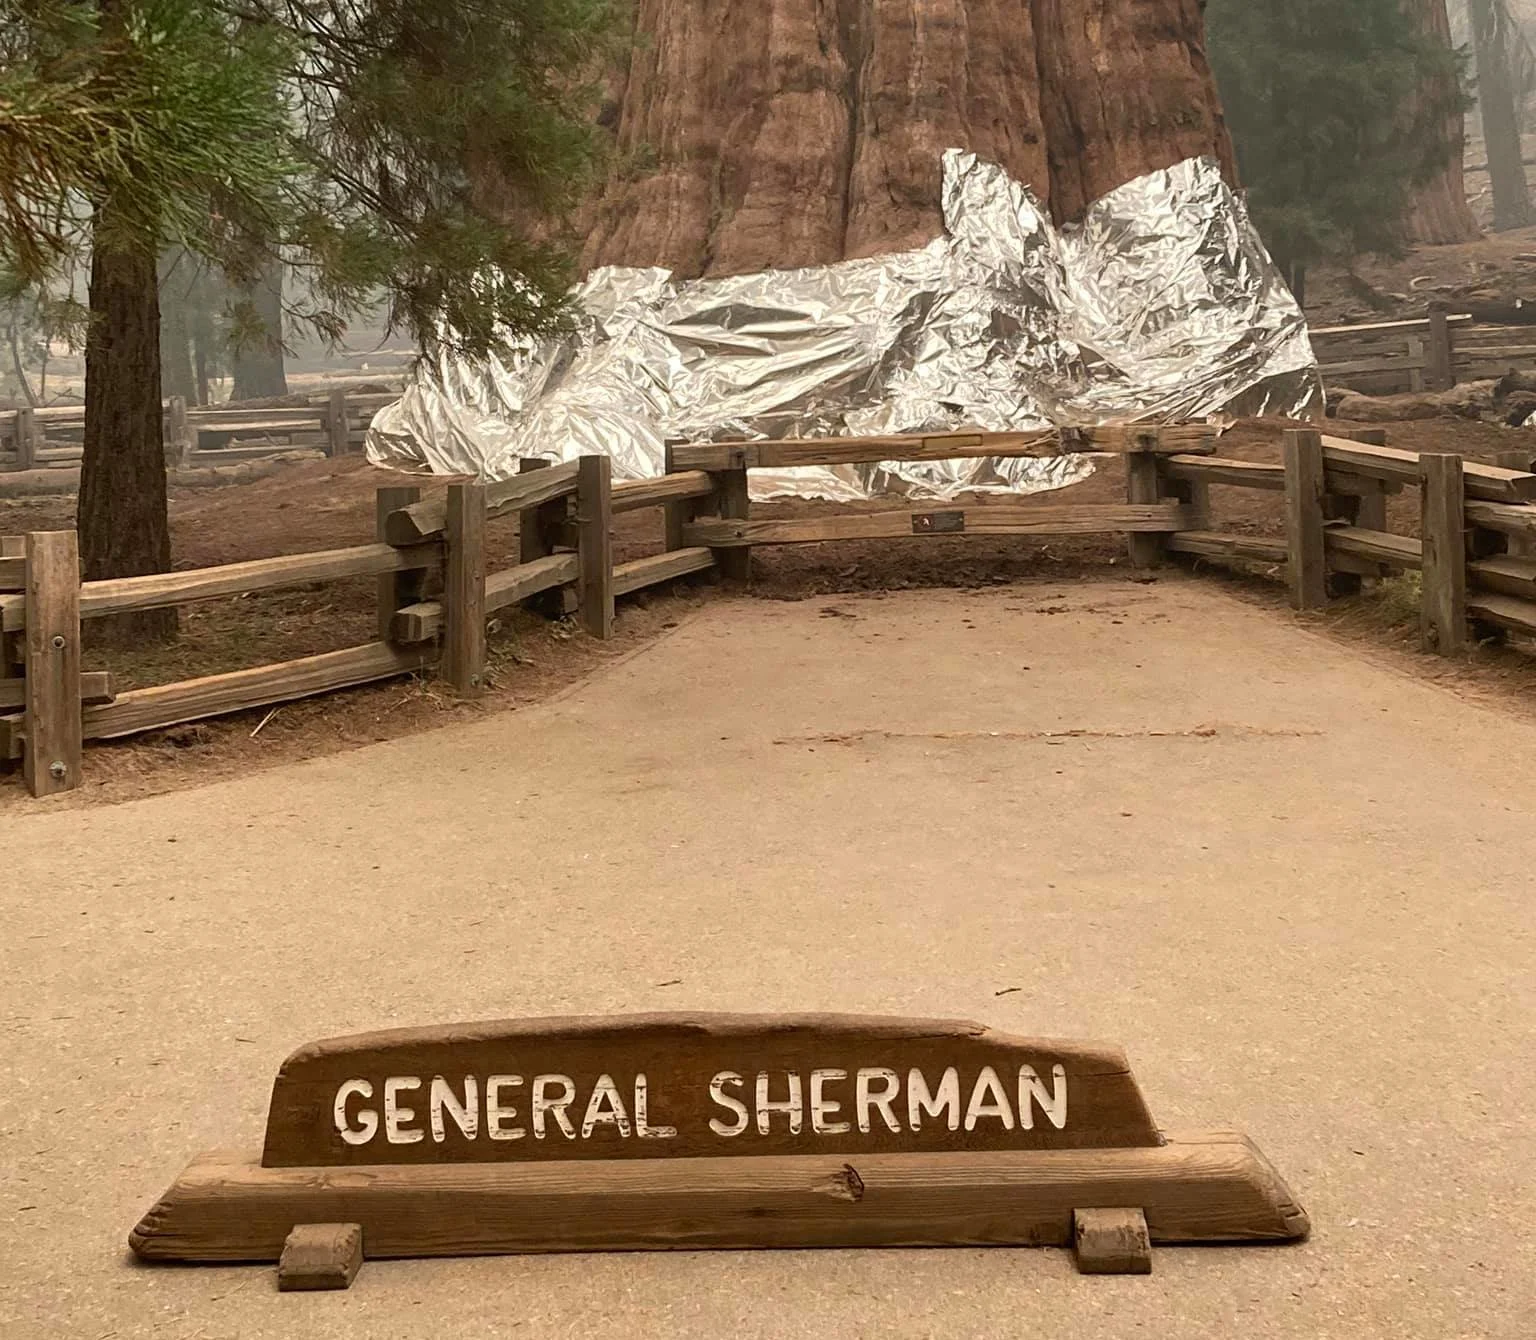 Firefighters use aluminum wrap to protect enormous tree from wildfires